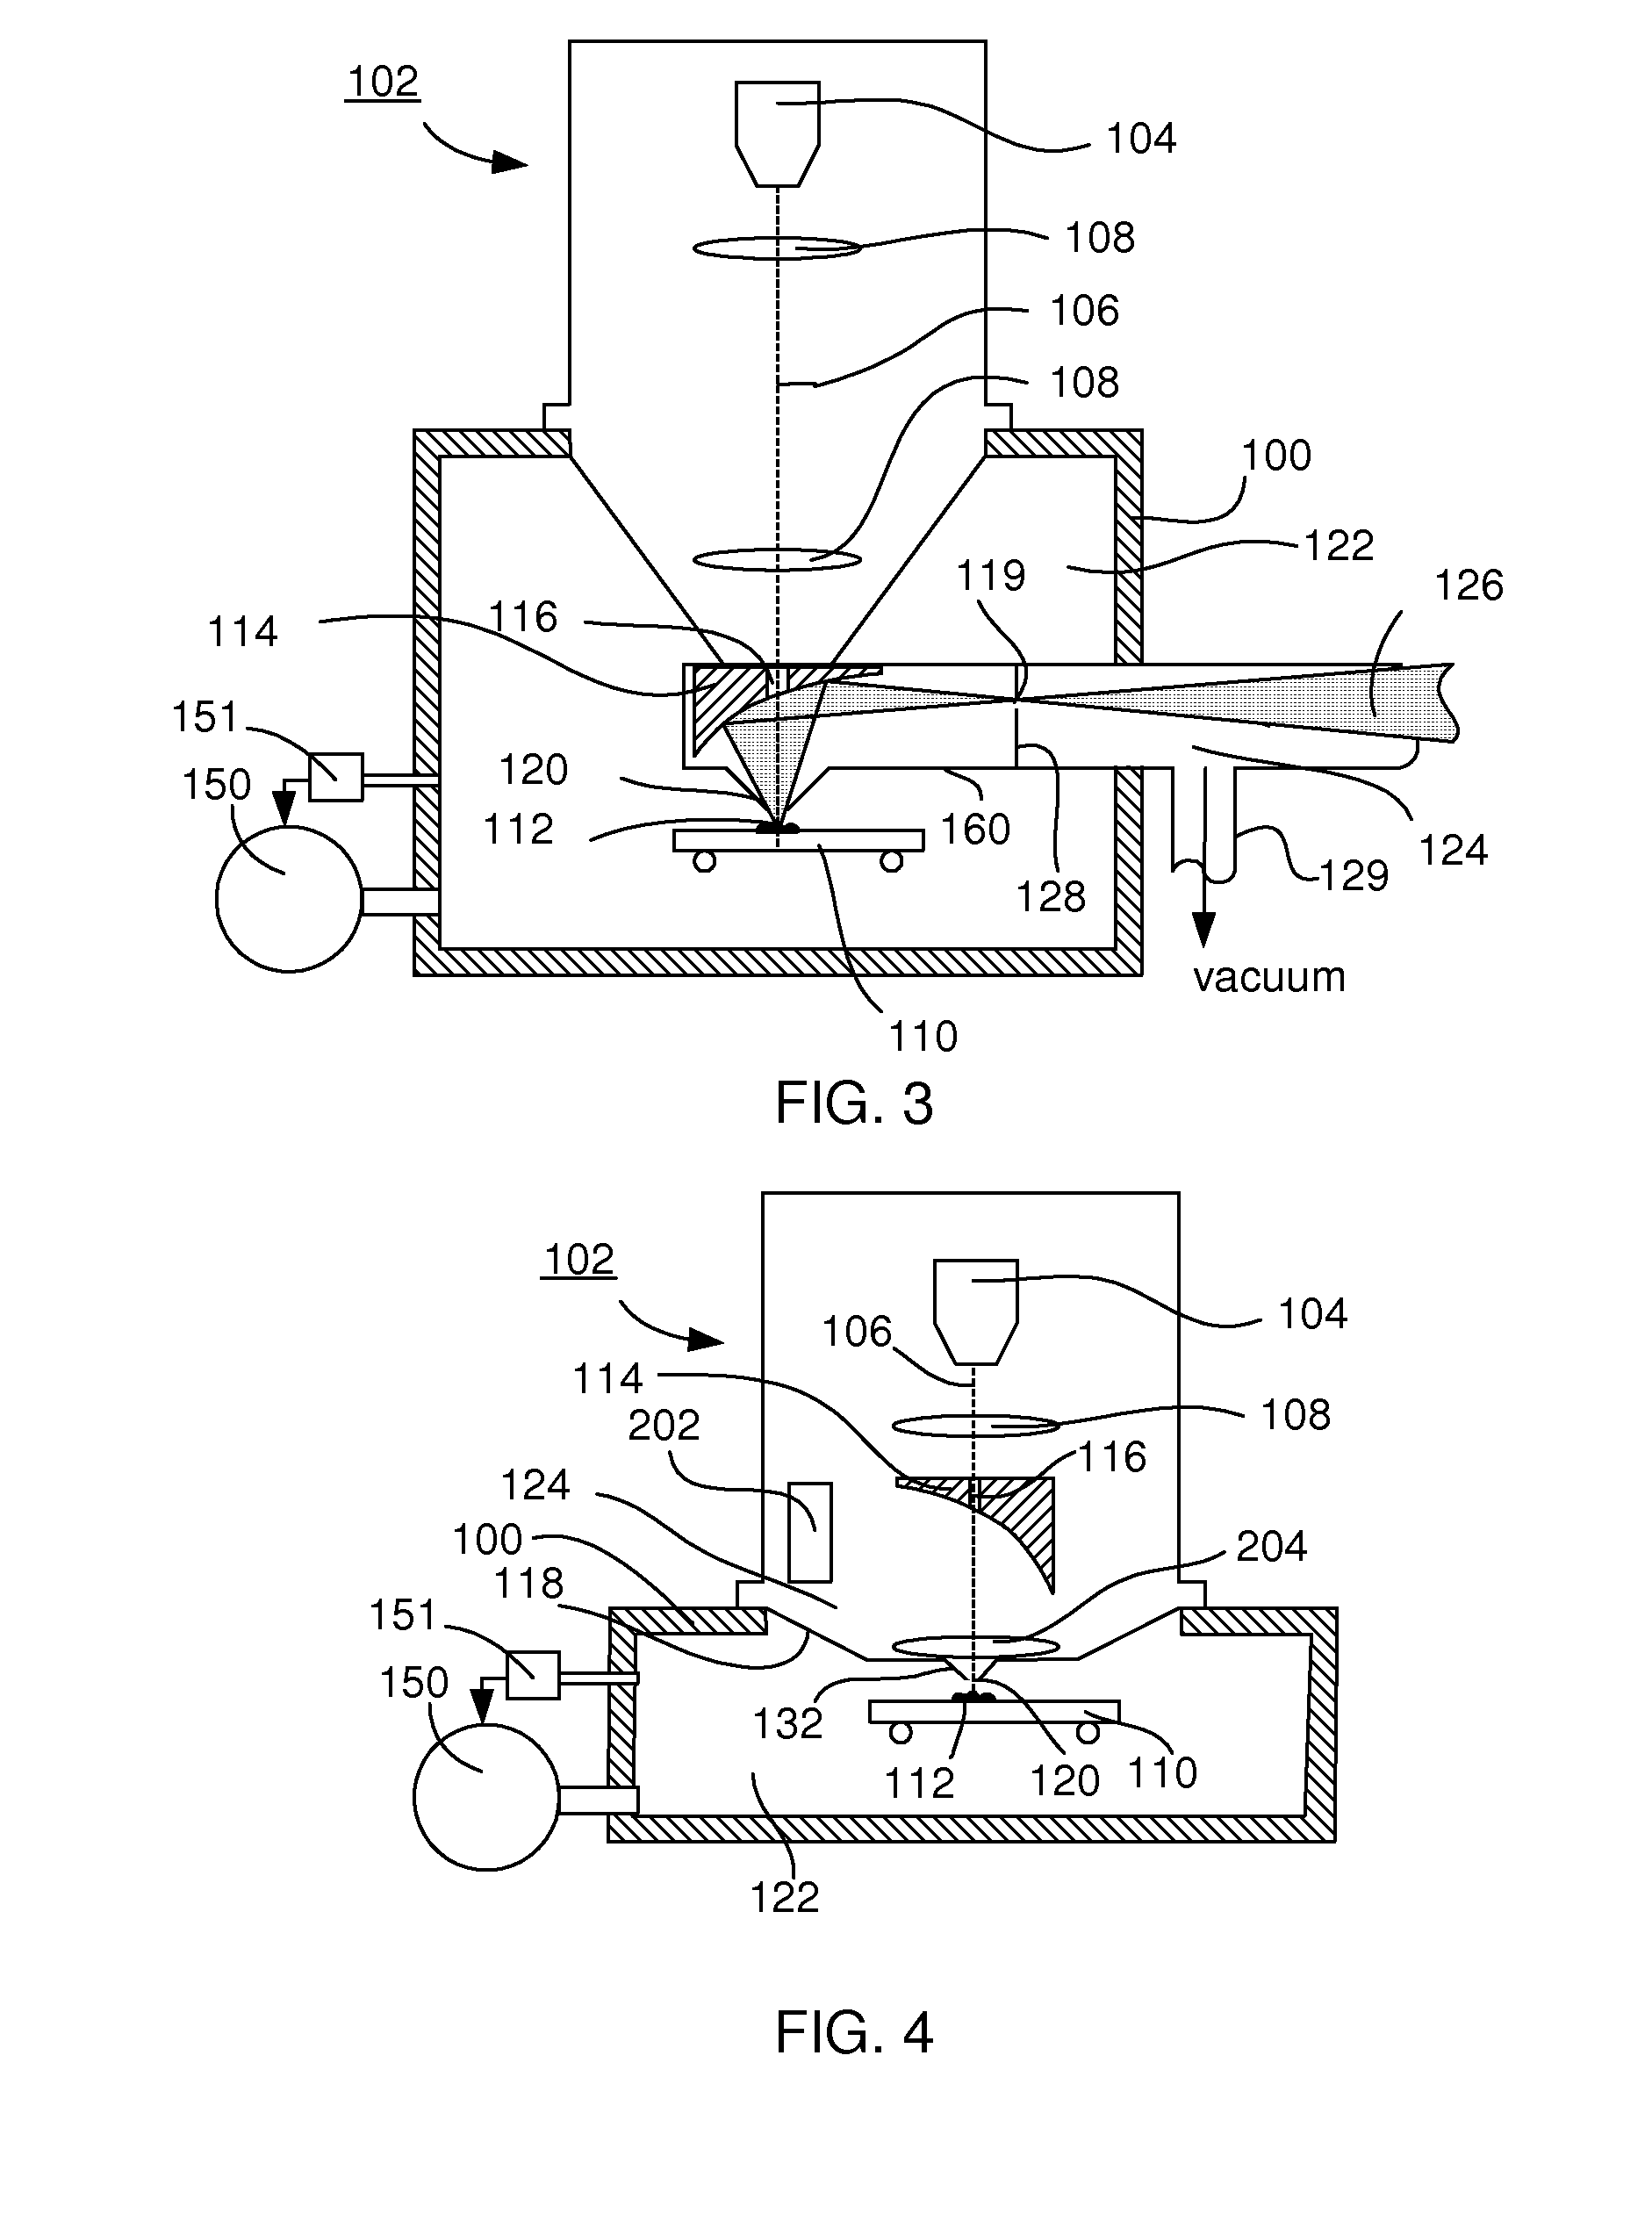 Particle-optical apparatus for simultaneous observing a sample with particles and photons